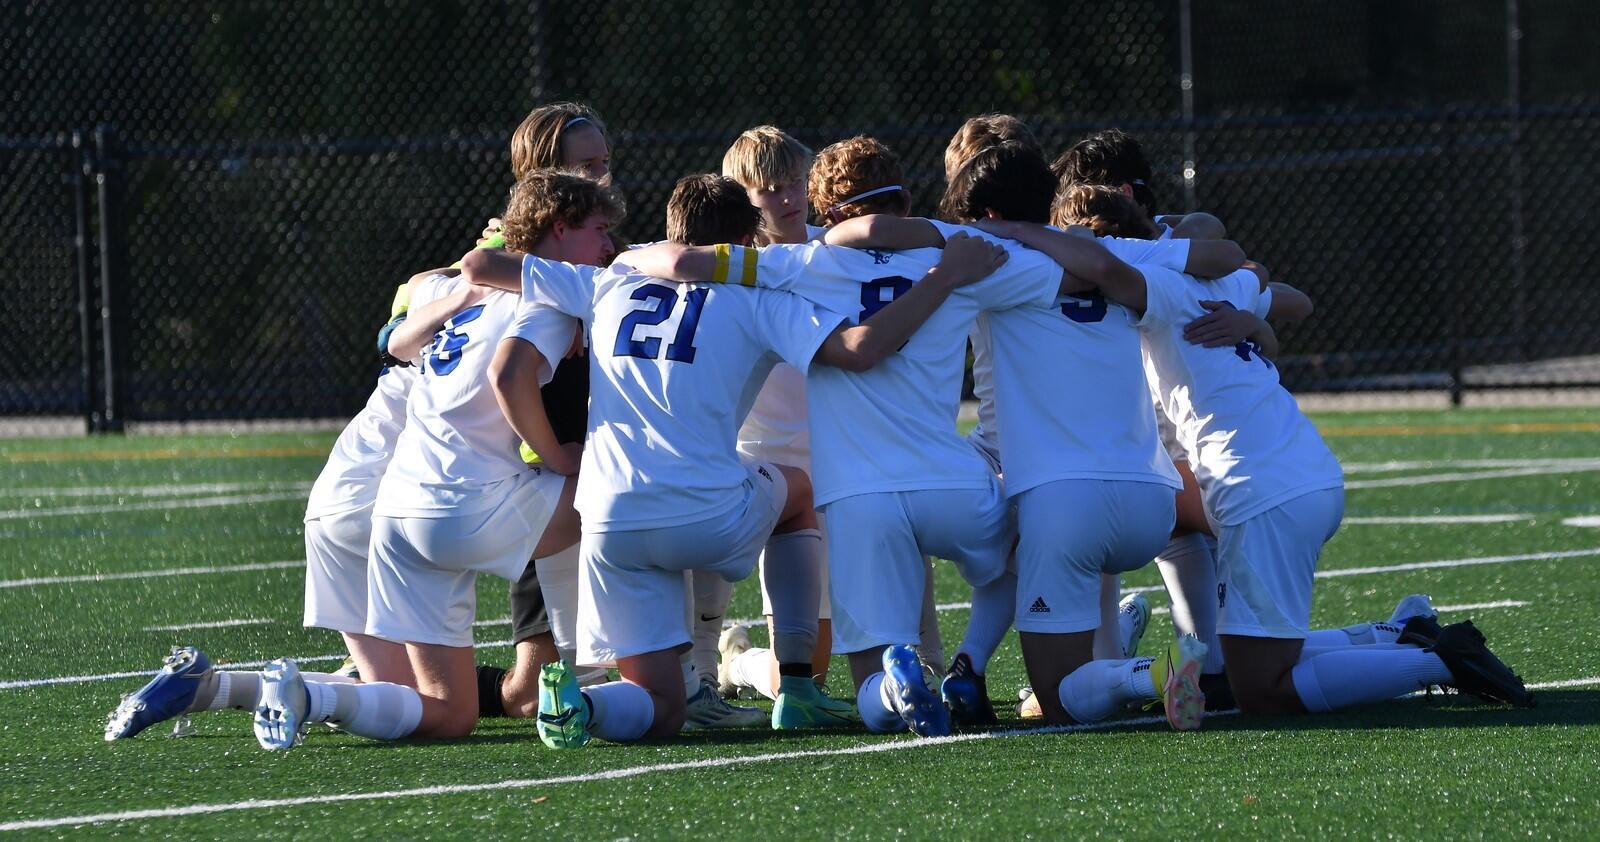 Boys soccer players in huddle on the field